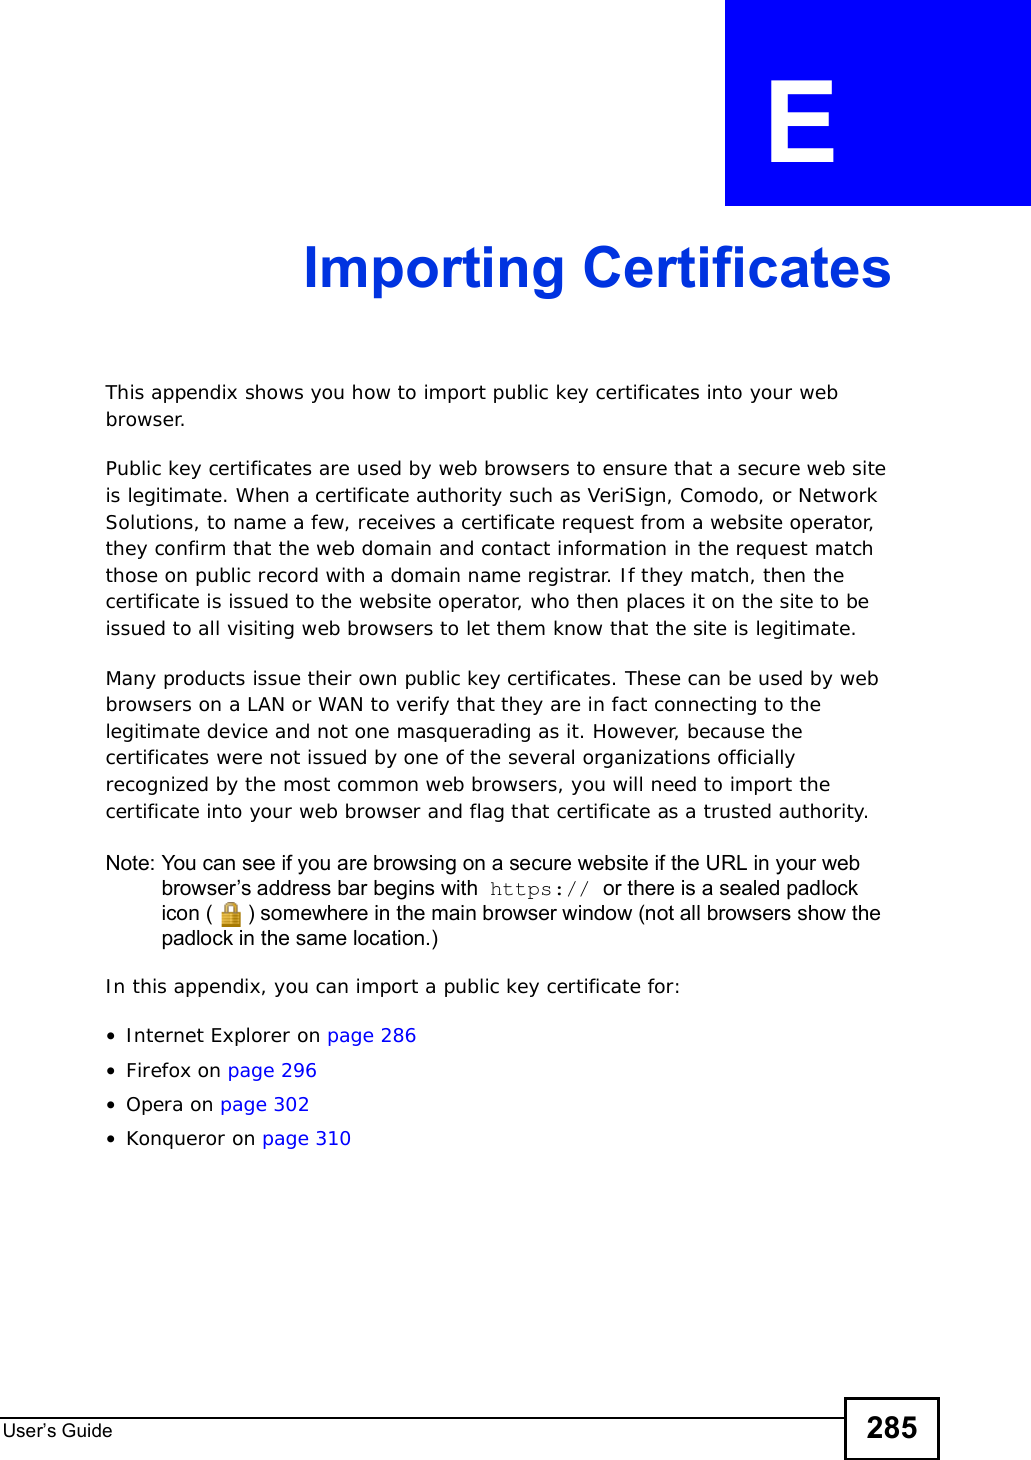 User s Guide 285APPENDIX  E Importing CertificatesThis appendix shows you how to import public key certificates into your web browser. Public key certificates are used by web browsers to ensure that a secure web site is legitimate. When a certificate authority such as VeriSign, Comodo, or Network Solutions, to name a few, receives a certificate request from a website operator, they confirm that the web domain and contact information in the request match those on public record with a domain name registrar. If they match, then the certificate is issued to the website operator, who then places it on the site to be issued to all visiting web browsers to let them know that the site is legitimate.Many products issue their own public key certificates. These can be used by web browsers on a LAN or WAN to verify that they are in fact connecting to the legitimate device and not one masquerading as it. However, because the certificates were not issued by one of the several organizations officially recognized by the most common web browsers, you will need to import the certificate into your web browser and flag that certificate as a trusted authority.Note: You can see if you are browsing on a secure website if the URL in your web browser s address bar begins with  https:// or there is a sealed padlock icon () somewhere in the main browser window (not all browsers show the padlock in the same location.)In this appendix, you can import a public key certificate for:•Internet Explorer on page 286•Firefox on page 296•Opera on page 302•Konqueror on page 310